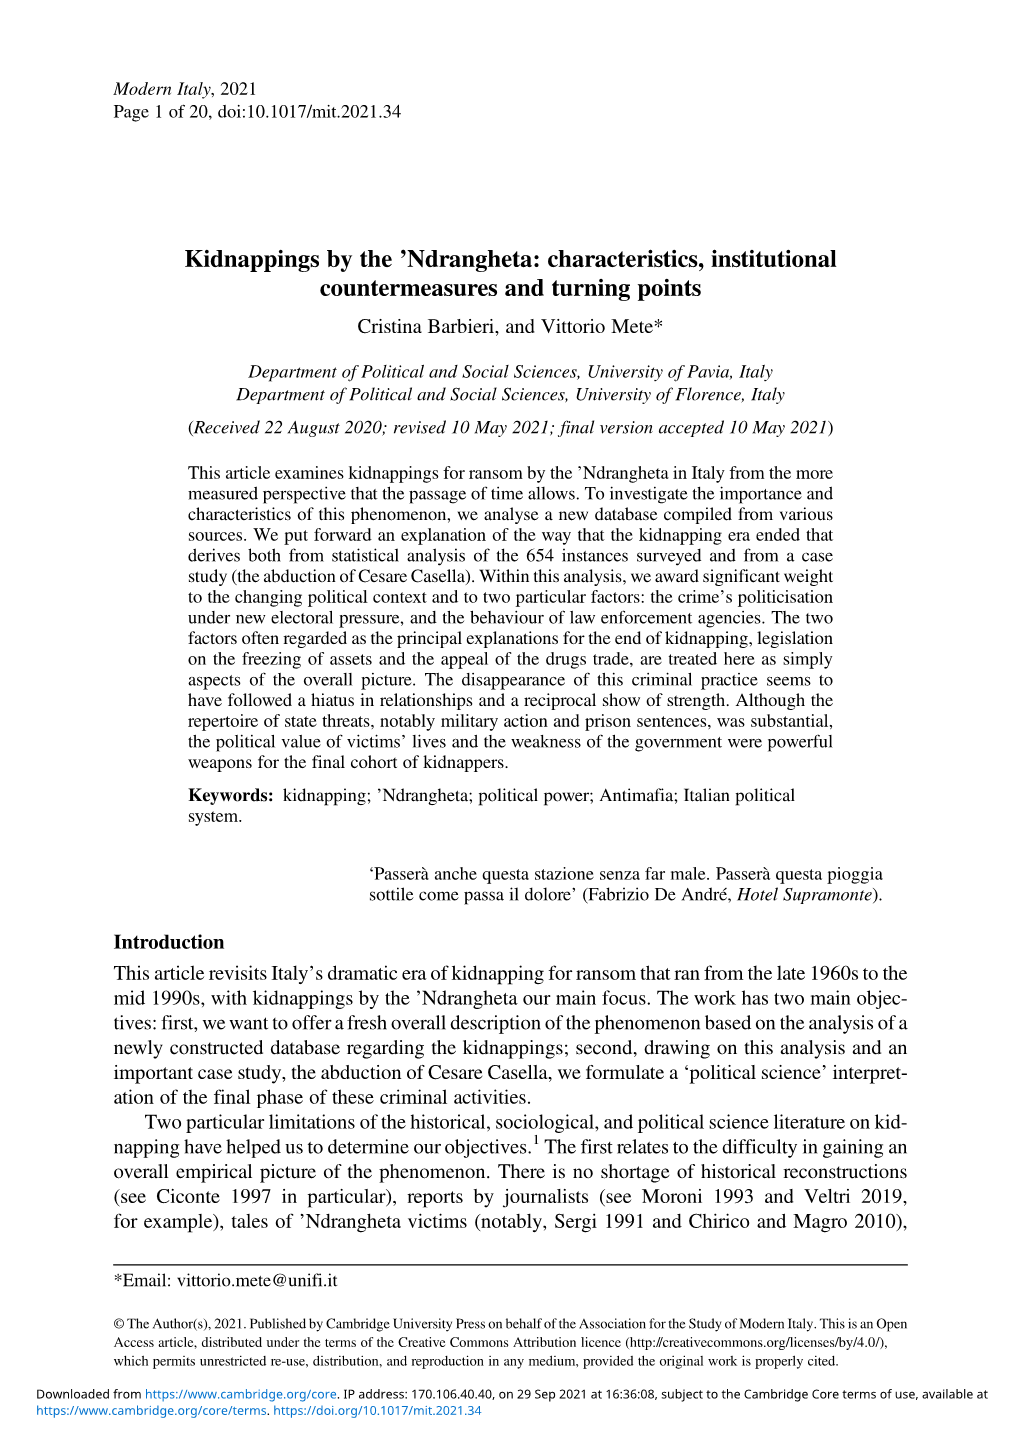 Kidnappings by the 'Ndrangheta: Characteristics, Institutional Countermeasures and Turning Points